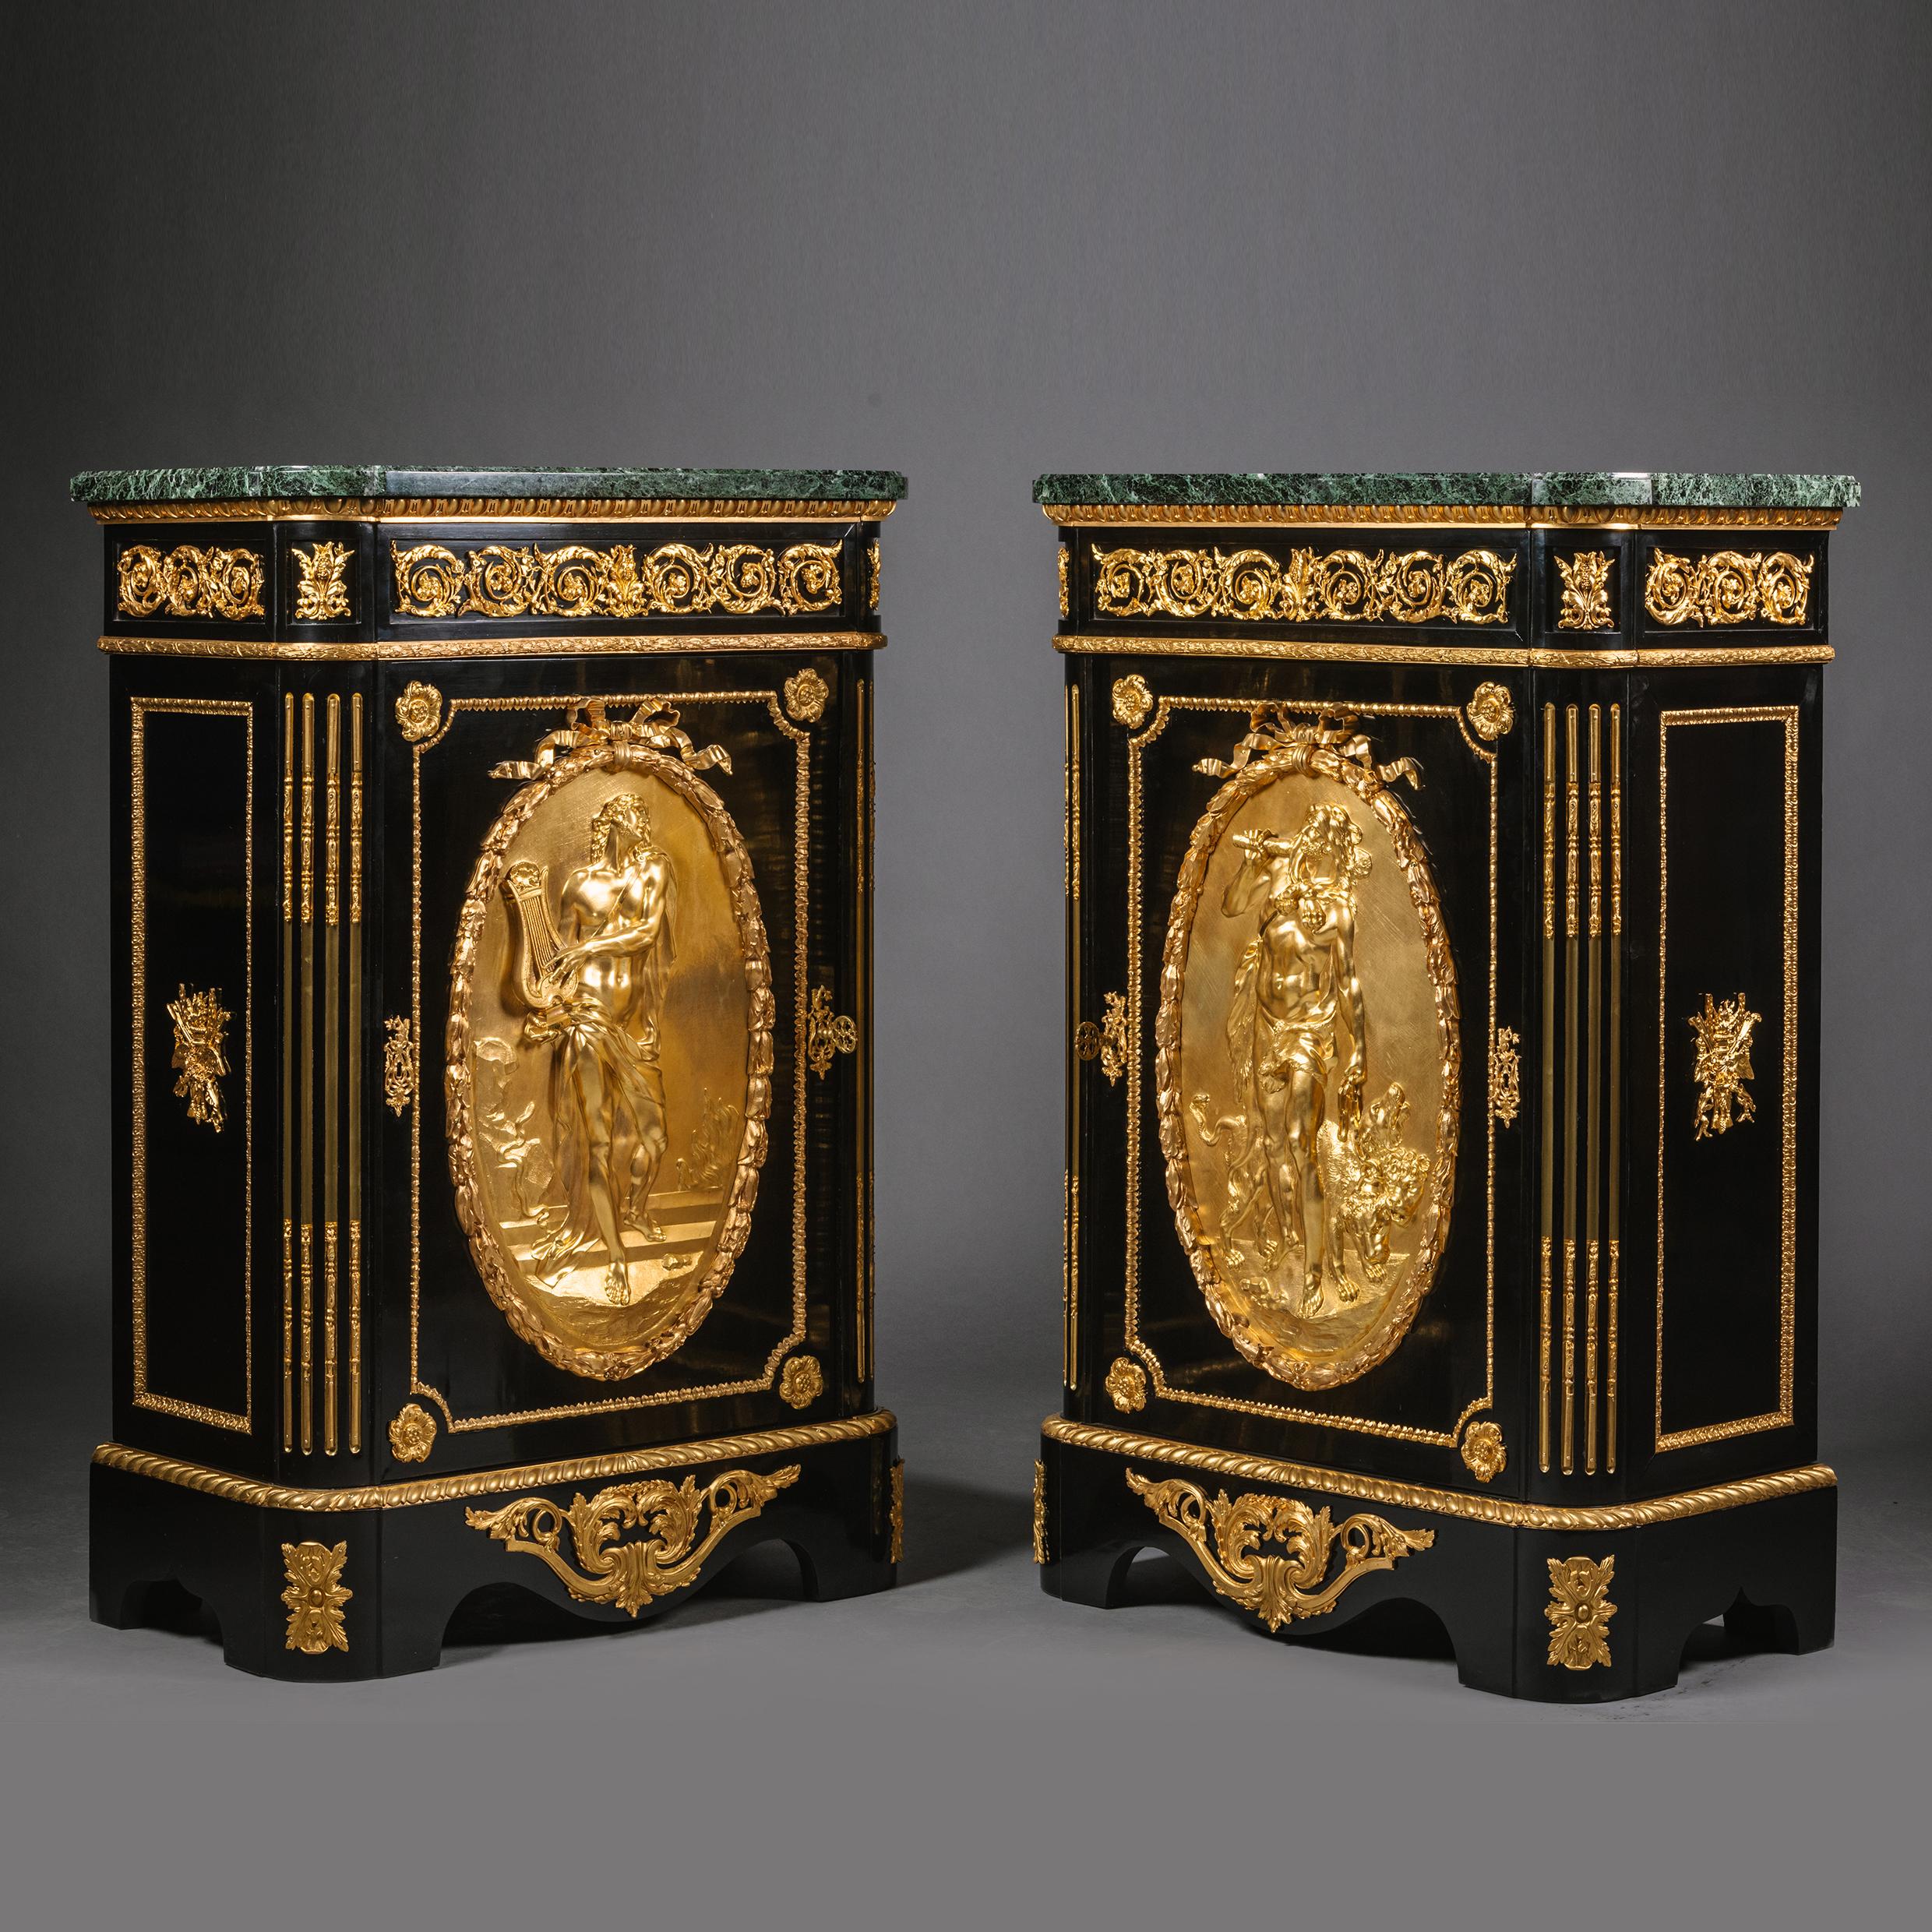 A pair of French gilt-bronze mounted and ebonised meubles d'appui, by Mathieu Béfort dit Béfort Jeune. 

Each has a vert maurin marble top above a cupboard door applied with large oval gilt-bronze medallions depicting Hercules and Orpheus, opening